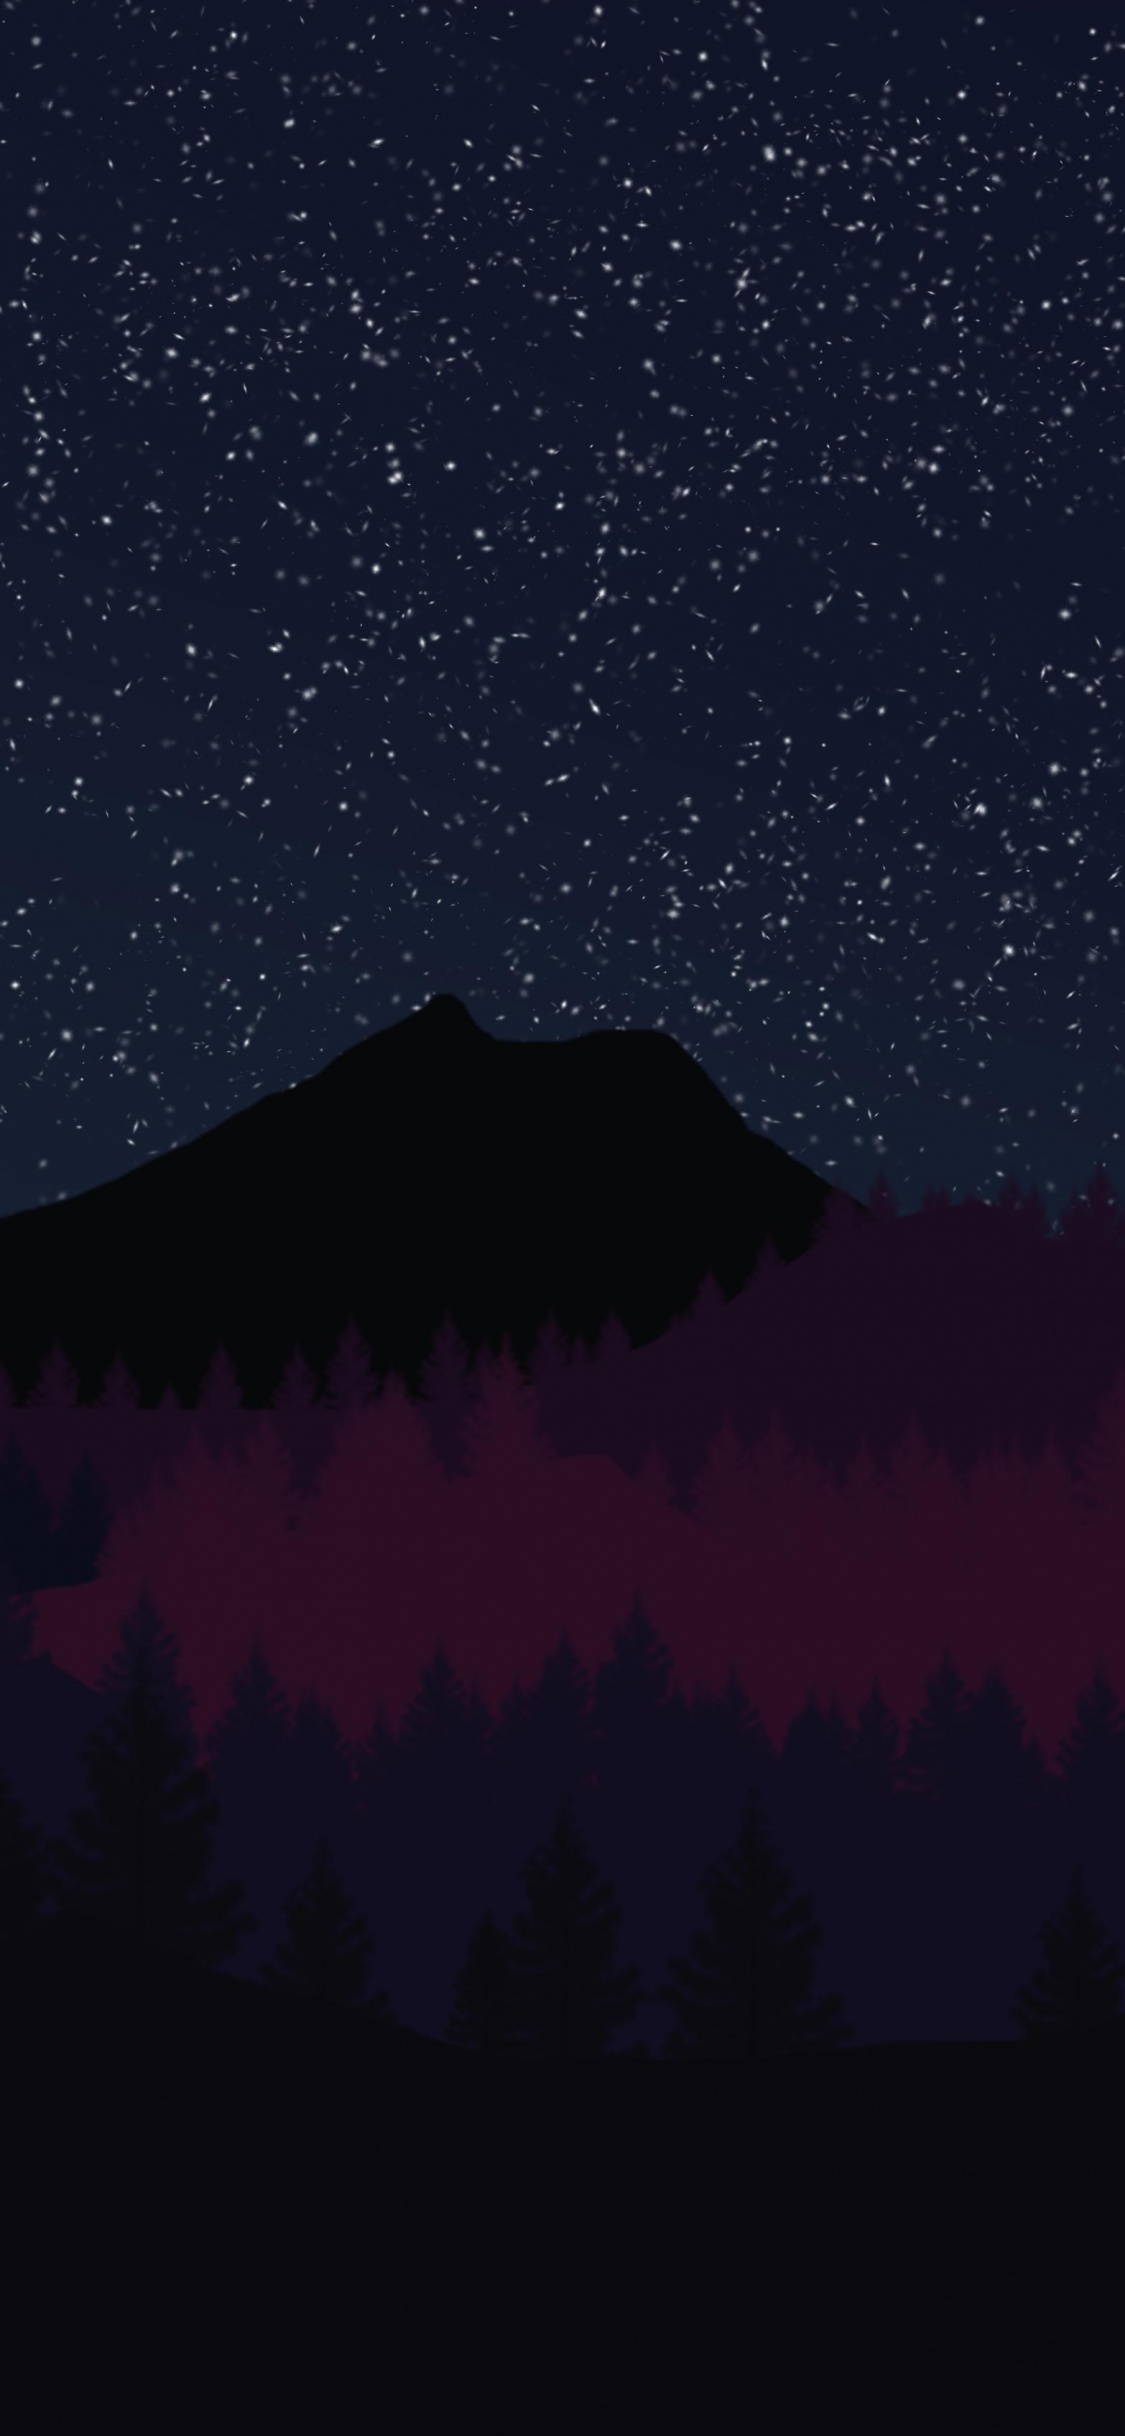 Silhouette of Trees Under Starry Night. Wallpaper in 1125x2436 Resolution